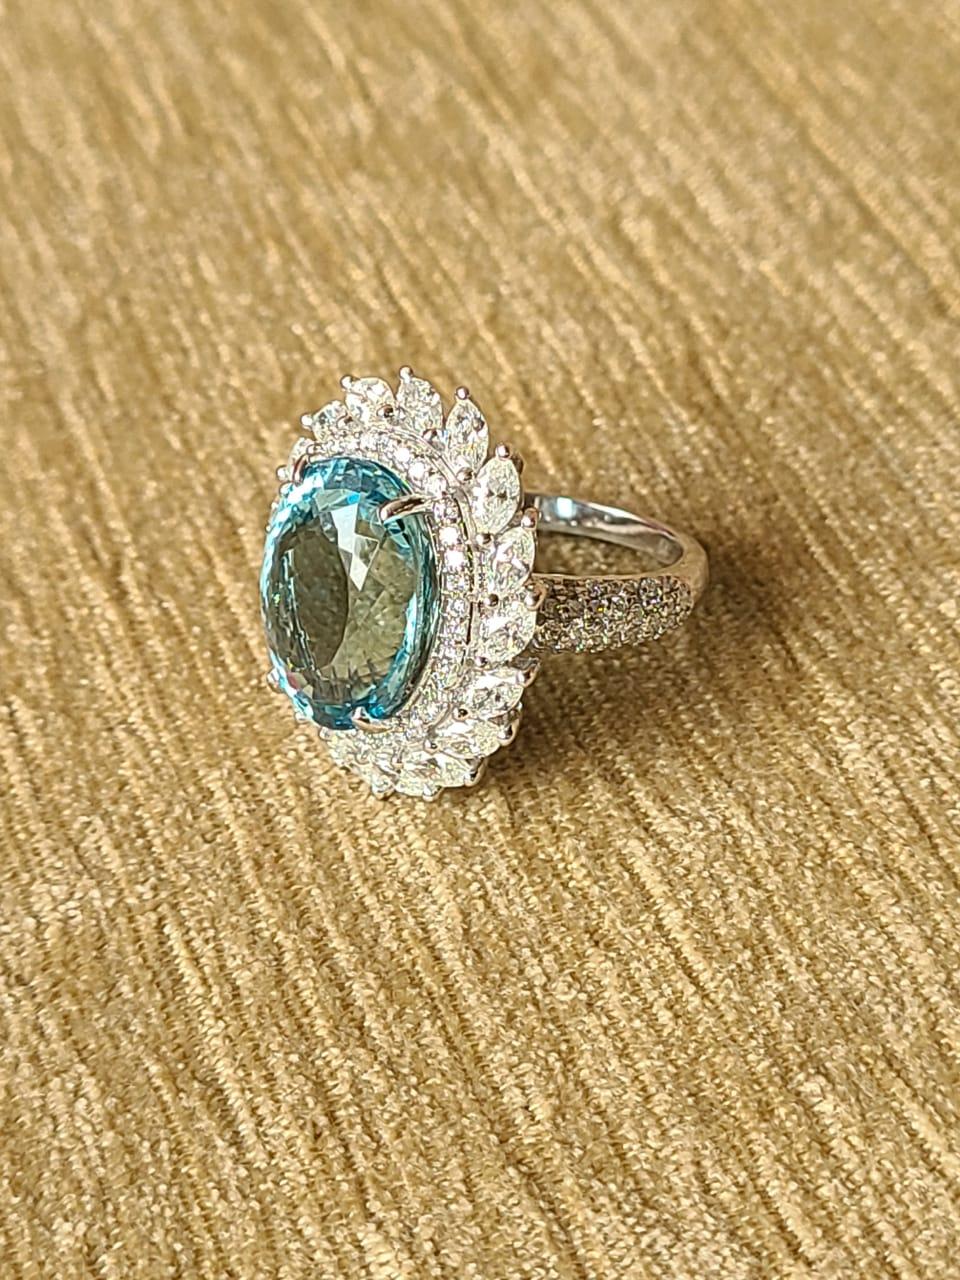 A very gorgeous and one of a kind Aquamarine Cocktail/ Engagement ring set in 18K Gold & Diamonds. The weight of the Aquamarine is 8.56 carats. The combined weight of the Diamonds is 2.37 carats. Net Gold weight is 8.86 grams. The dimensions of the